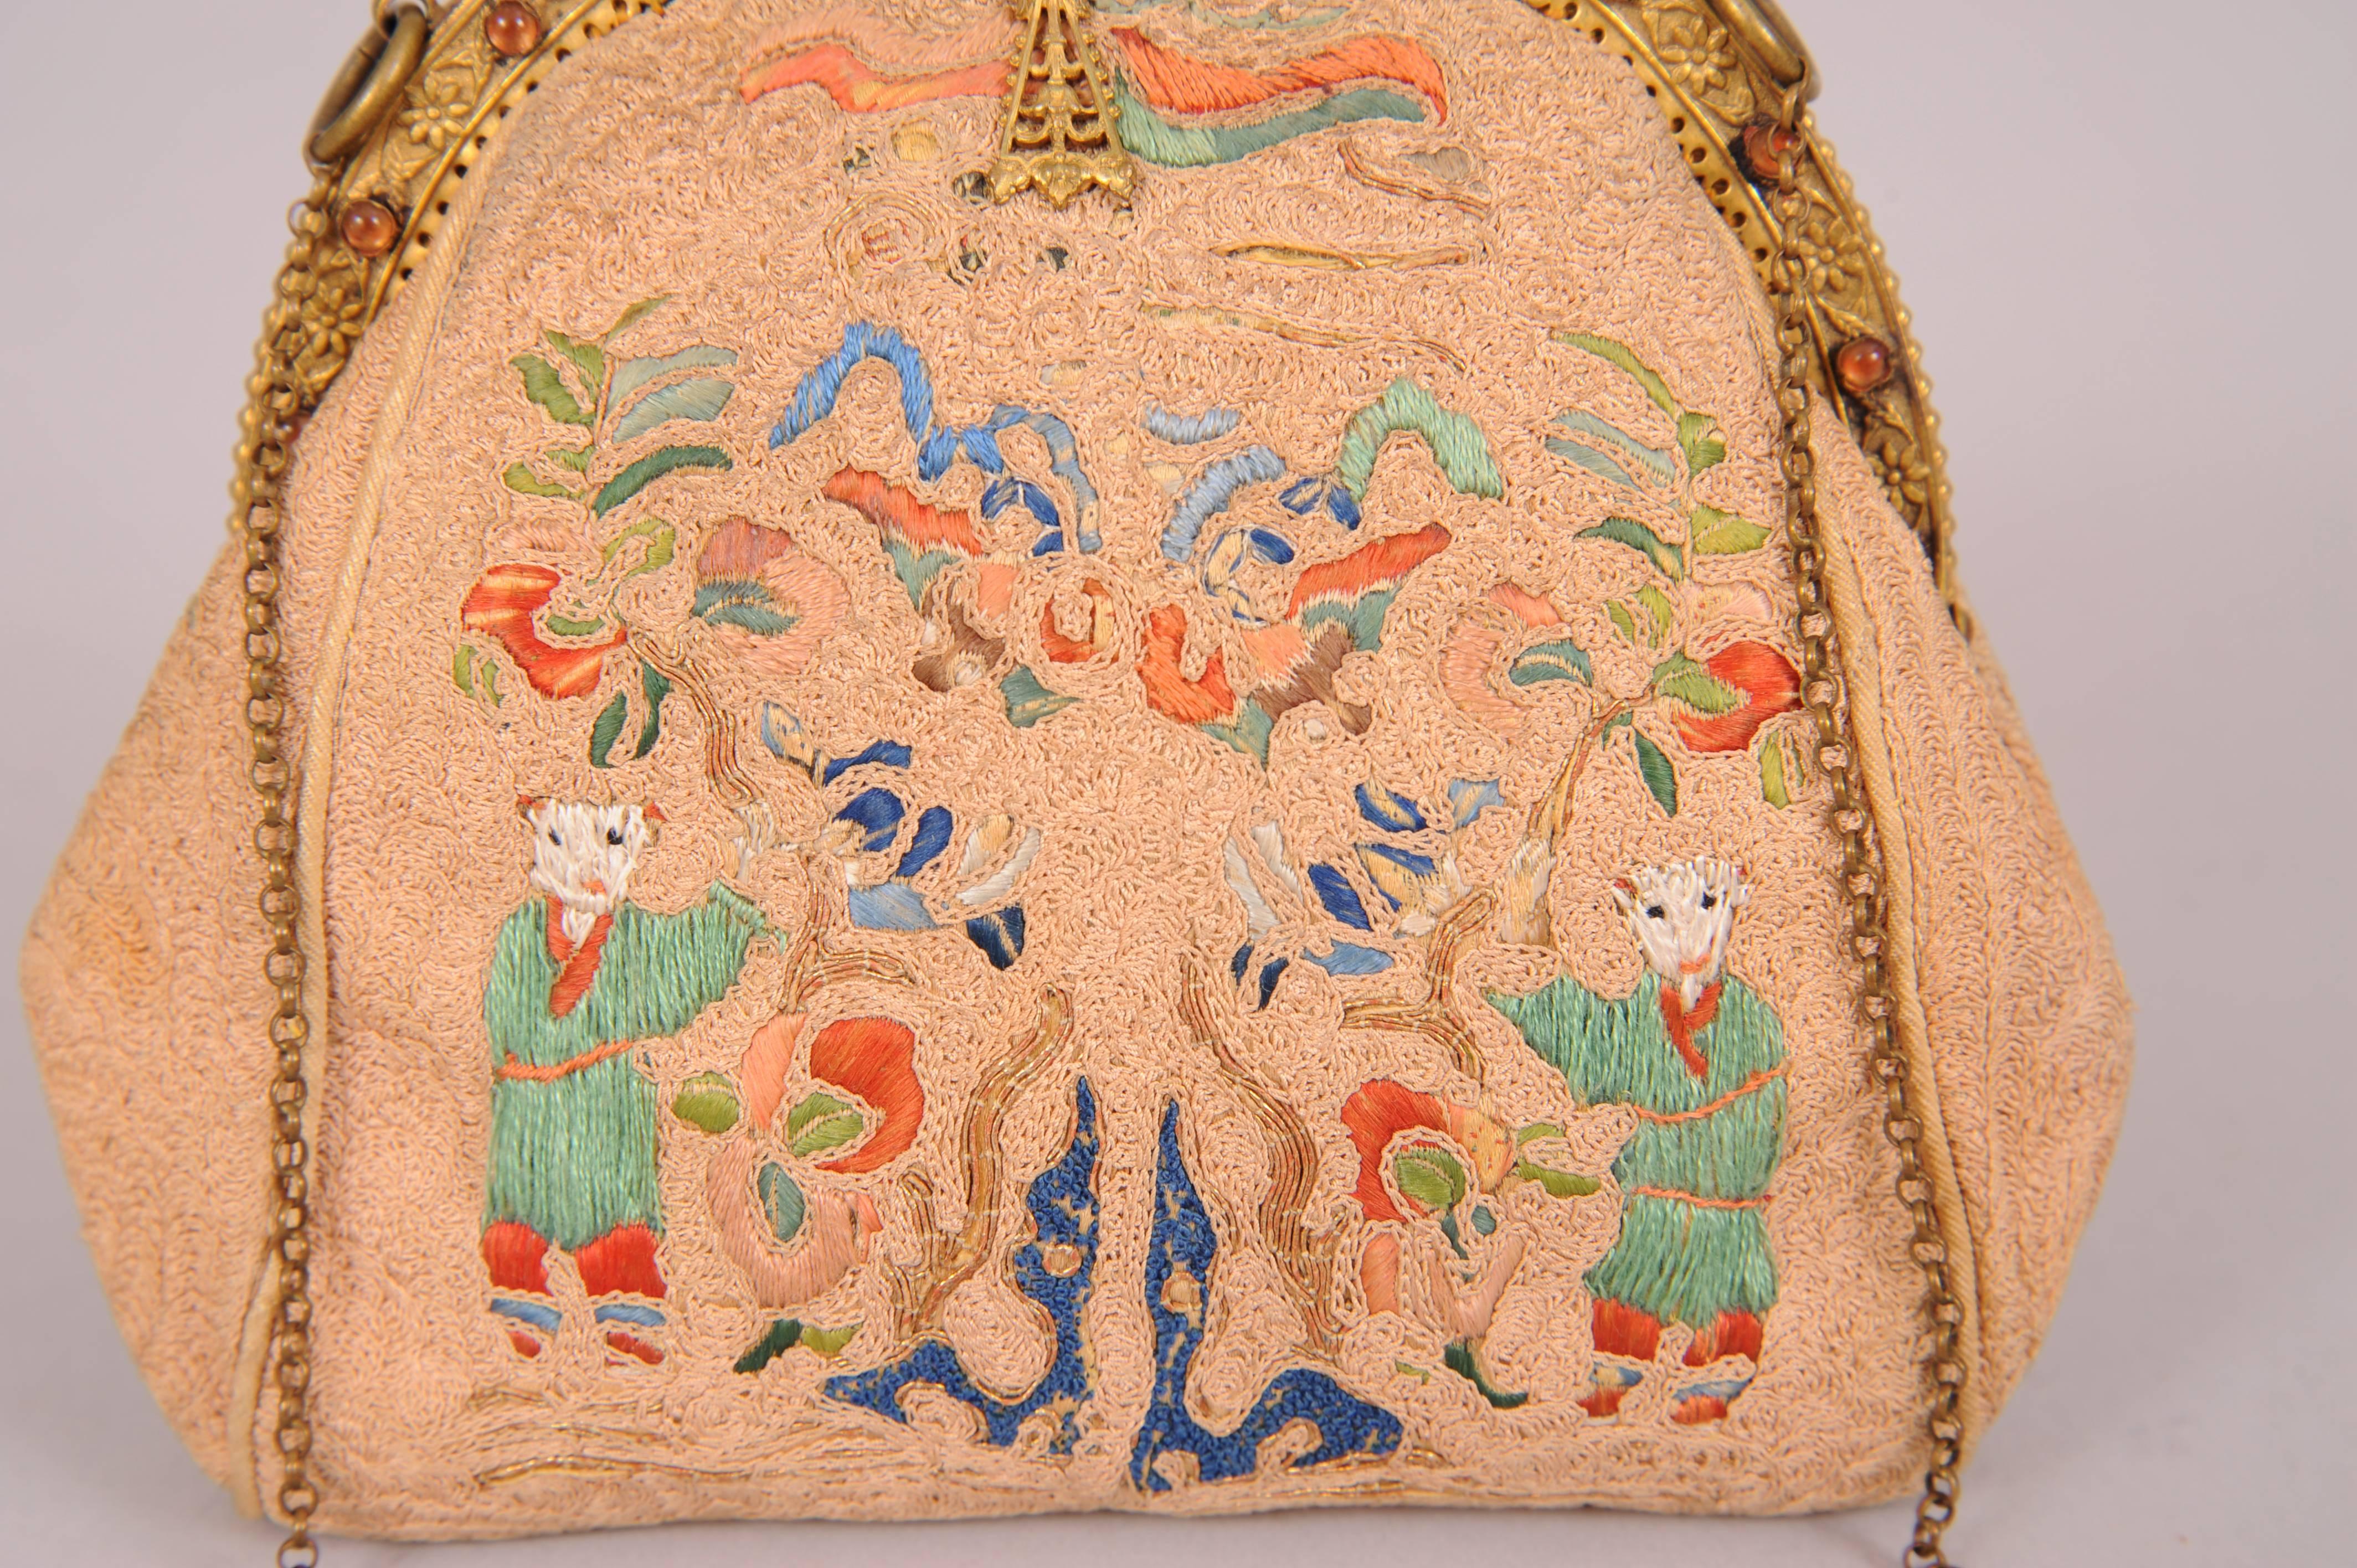 Delicate Chinese hand embroidery is worked in silk and metallic thread in shades of green, coral, peach, blue and navy and depicts two figures on the front and back of the bag. The gold toned frame is set with jewels. The silk lining is in good